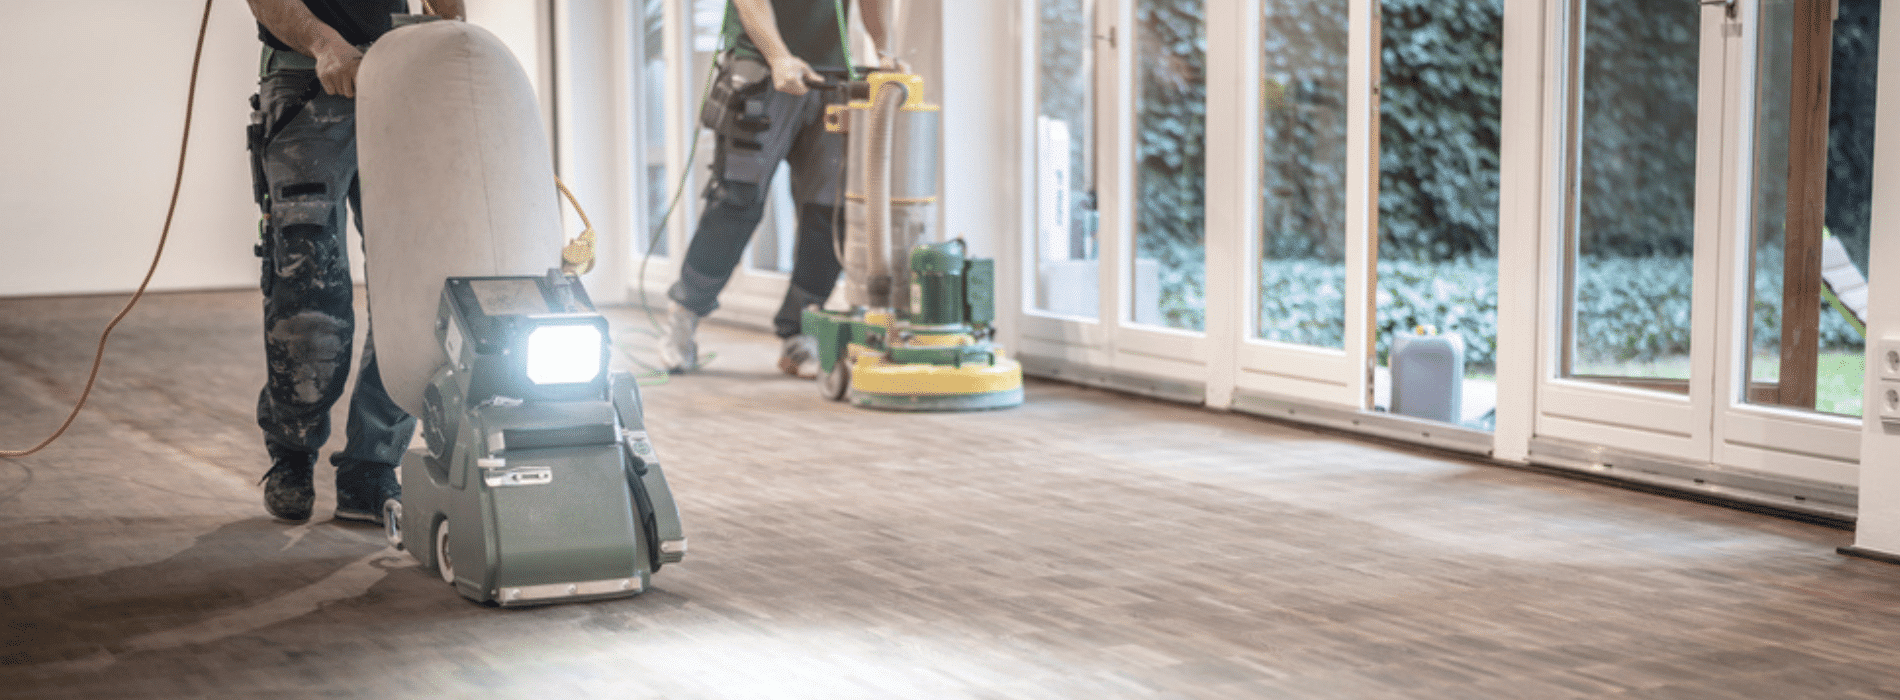 Mr Sander® are sanding a herringbone floor in Wandsworth, SW18 with a Bona Scorpion drum sander. This strong sander offers efficient results with dimensions of 200 mm, a power of 1.5 kW, and an operating voltage of 240 V and 50 Hz. The attached dust extraction system, which includes a HEPA filter, ensures a clean sanding procedure. 